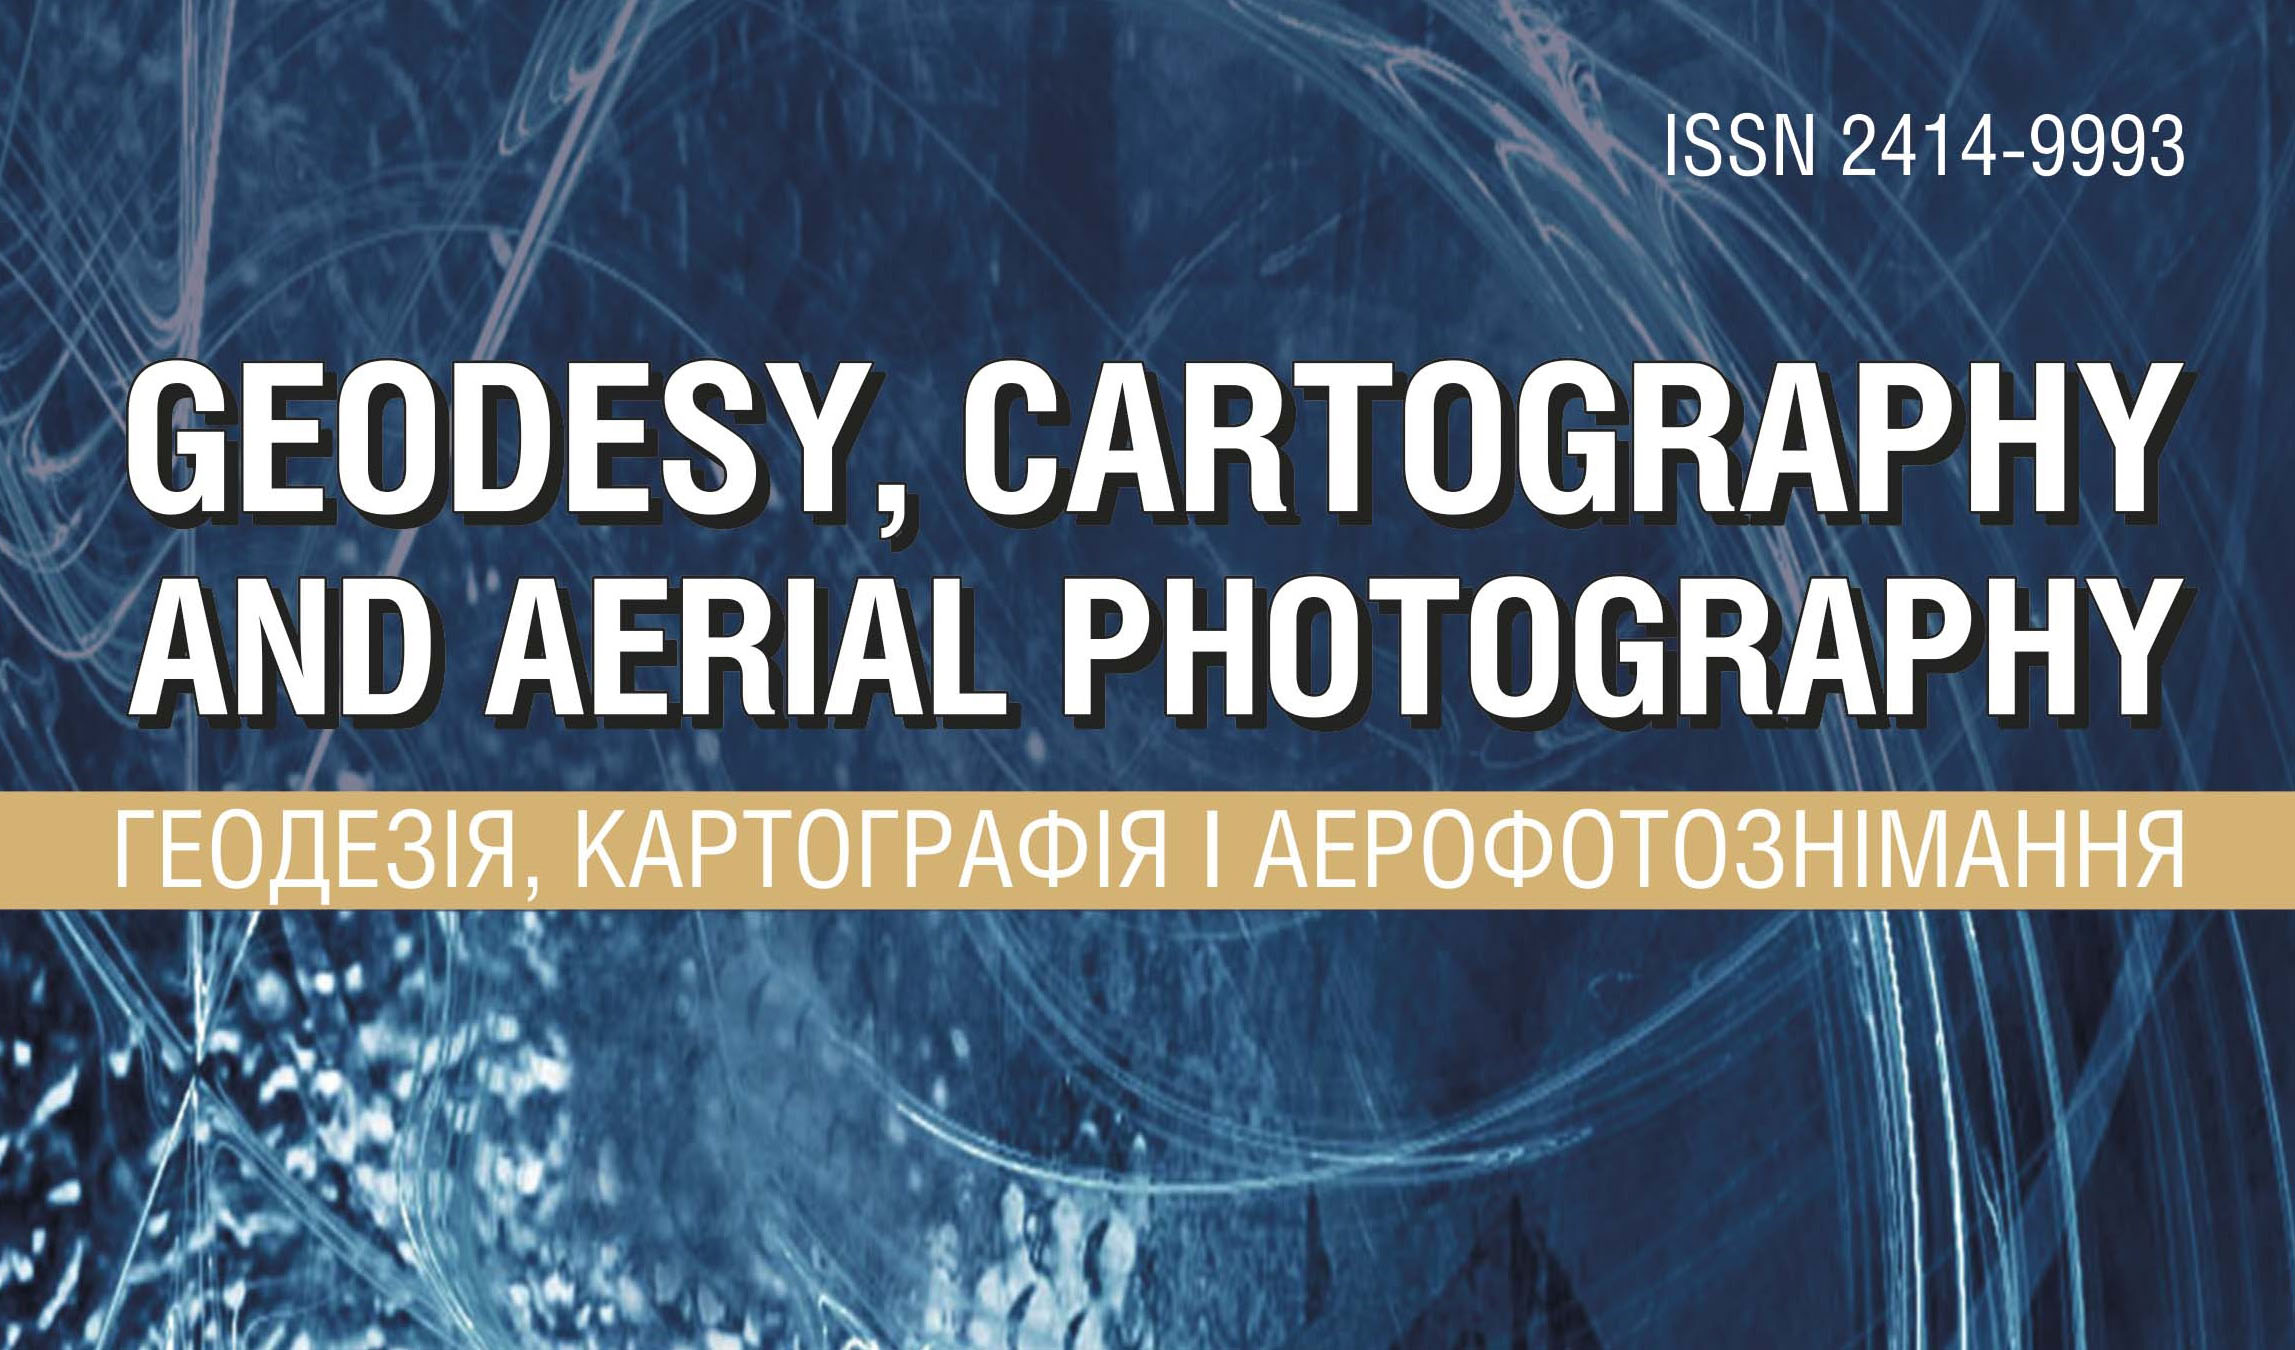 «Geodesy, Cartography and Aerial Photography»